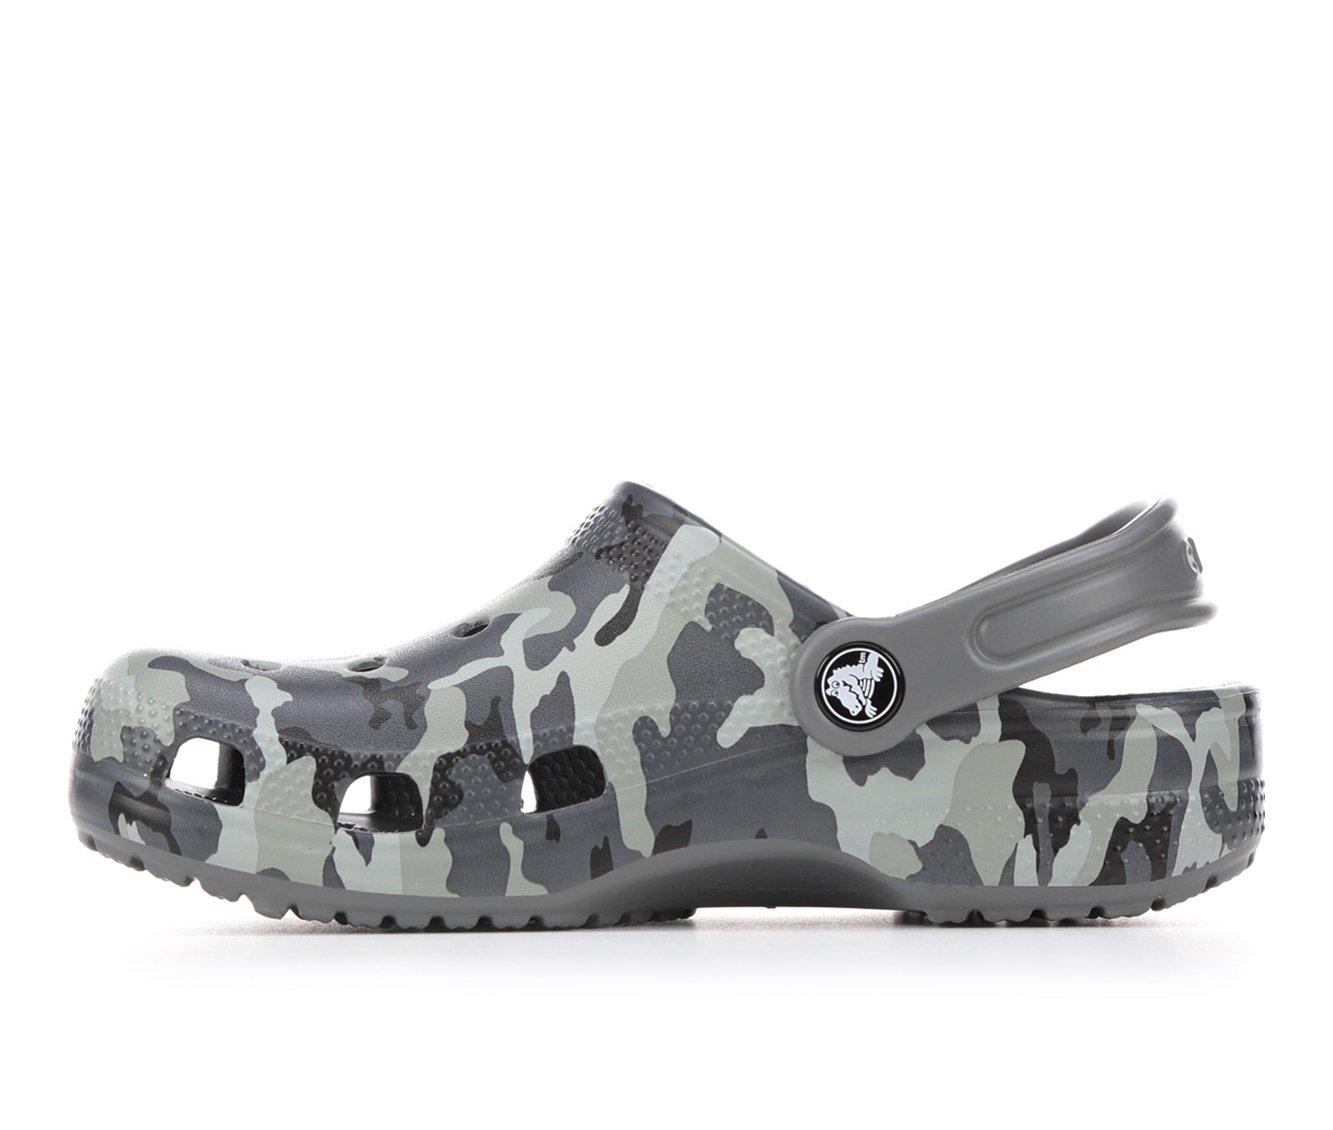 Skechers Clogs Camouflage Kids Shoes Size 7